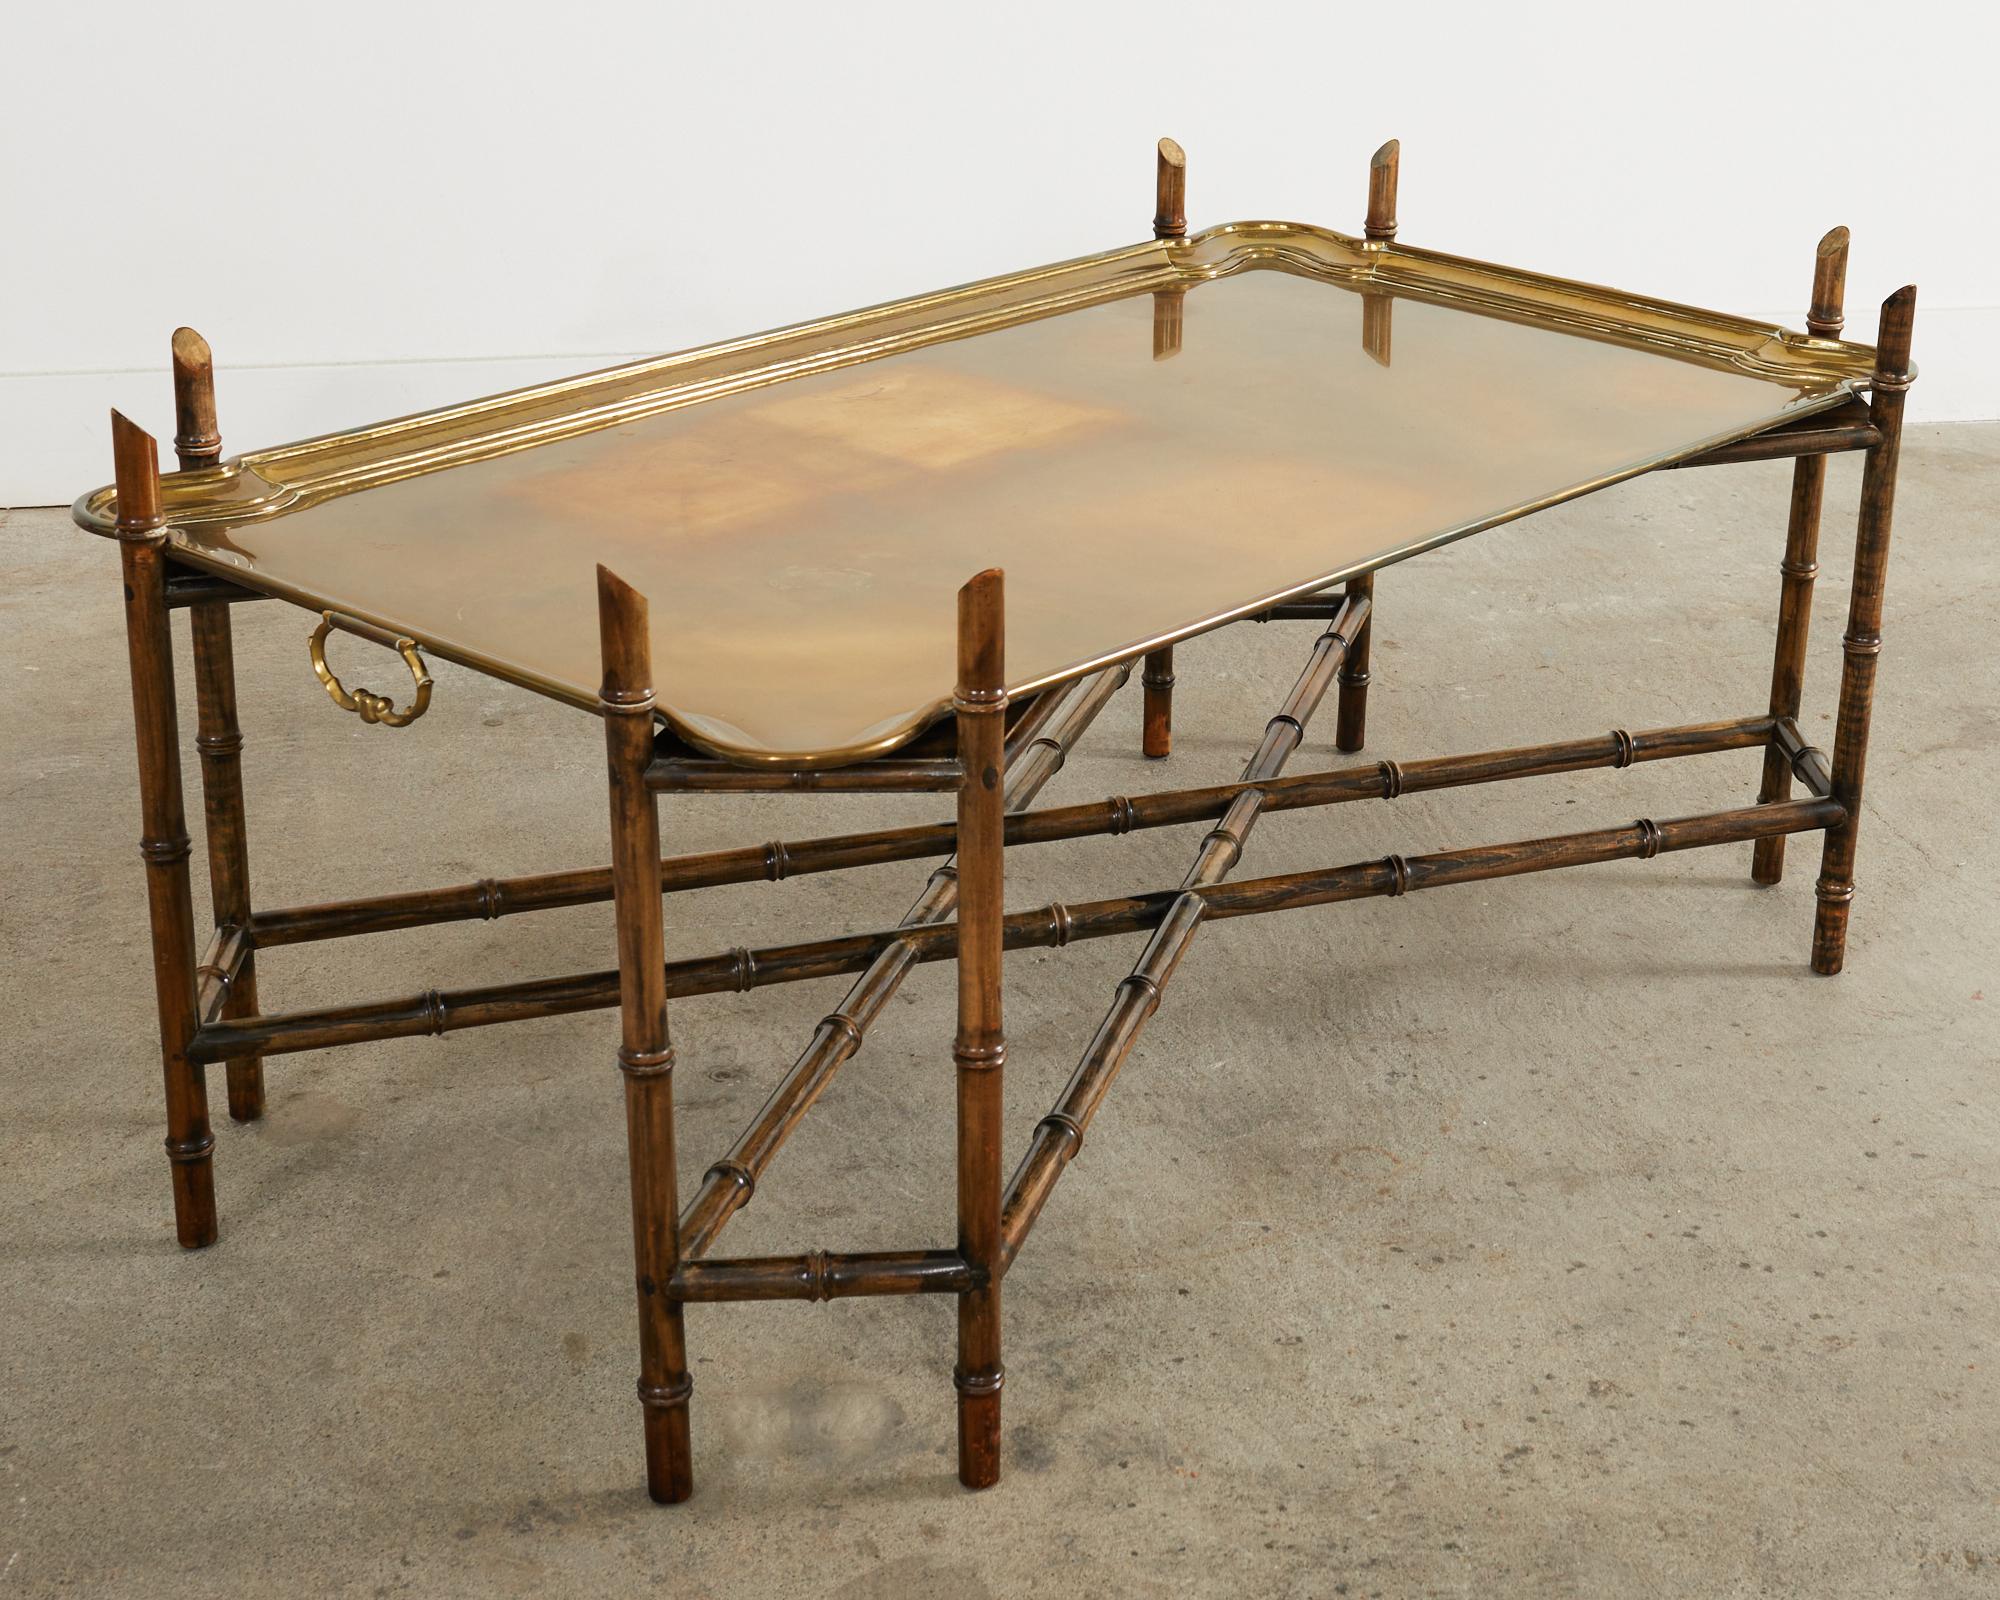 20th Century Hollywood Regency Brass Tray Cocktail Table with Faux Bamboo Legs For Sale